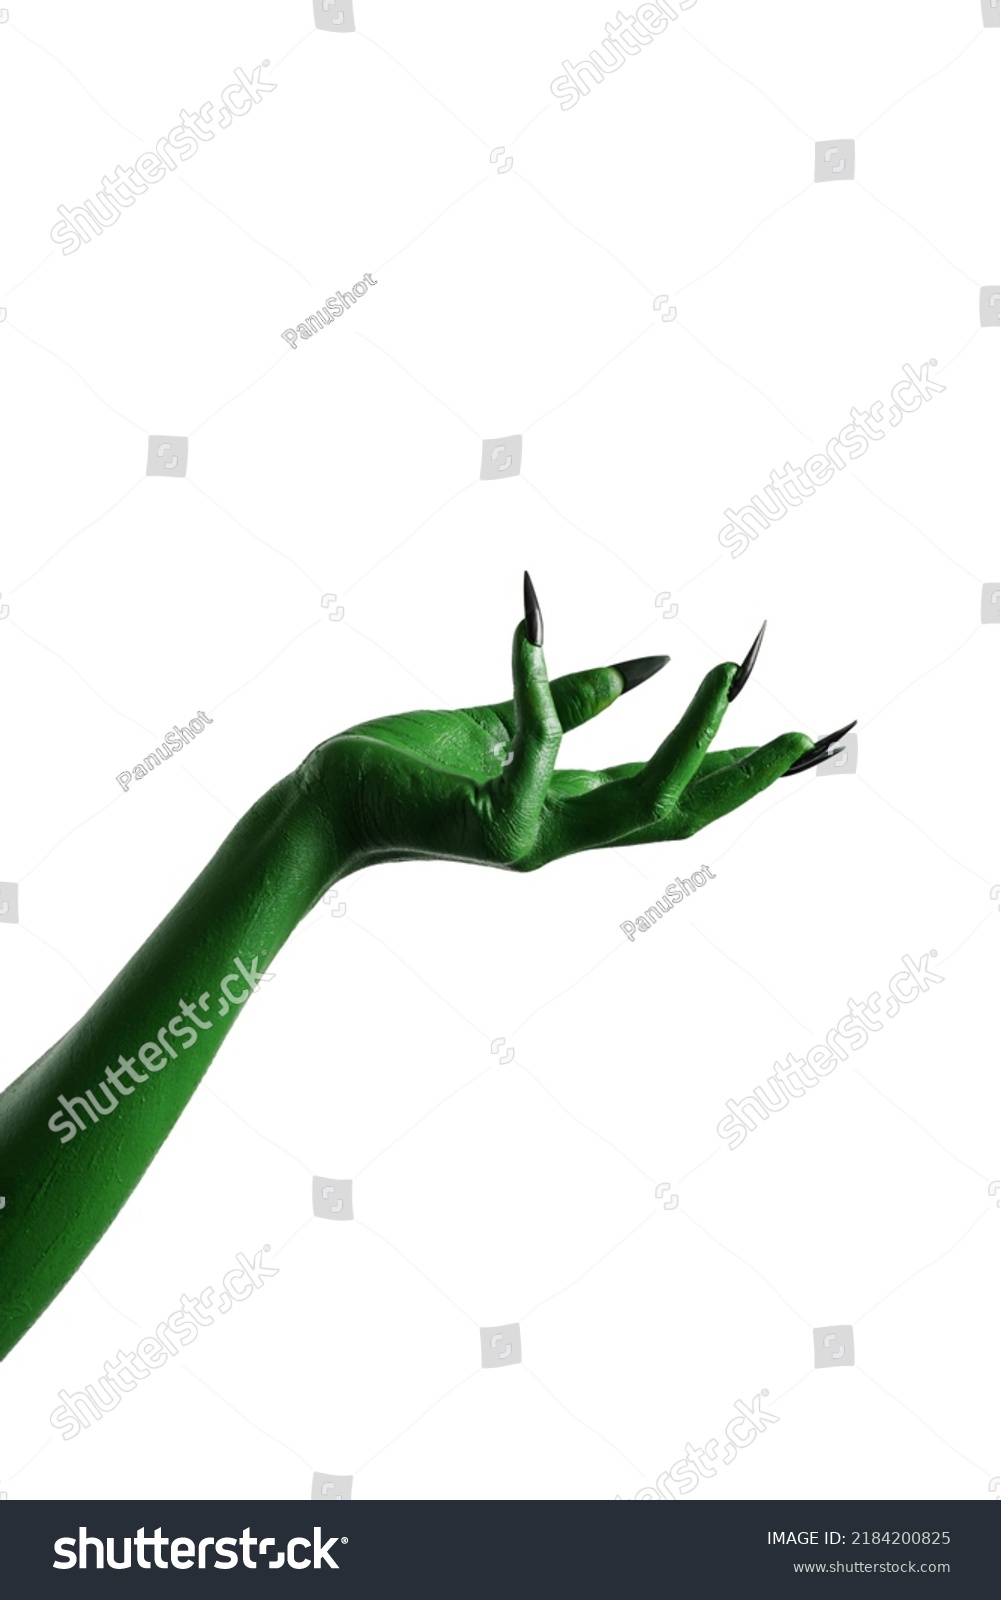 Halloween green color of witches, evil or zombie monster hand isolated on white background. #2184200825